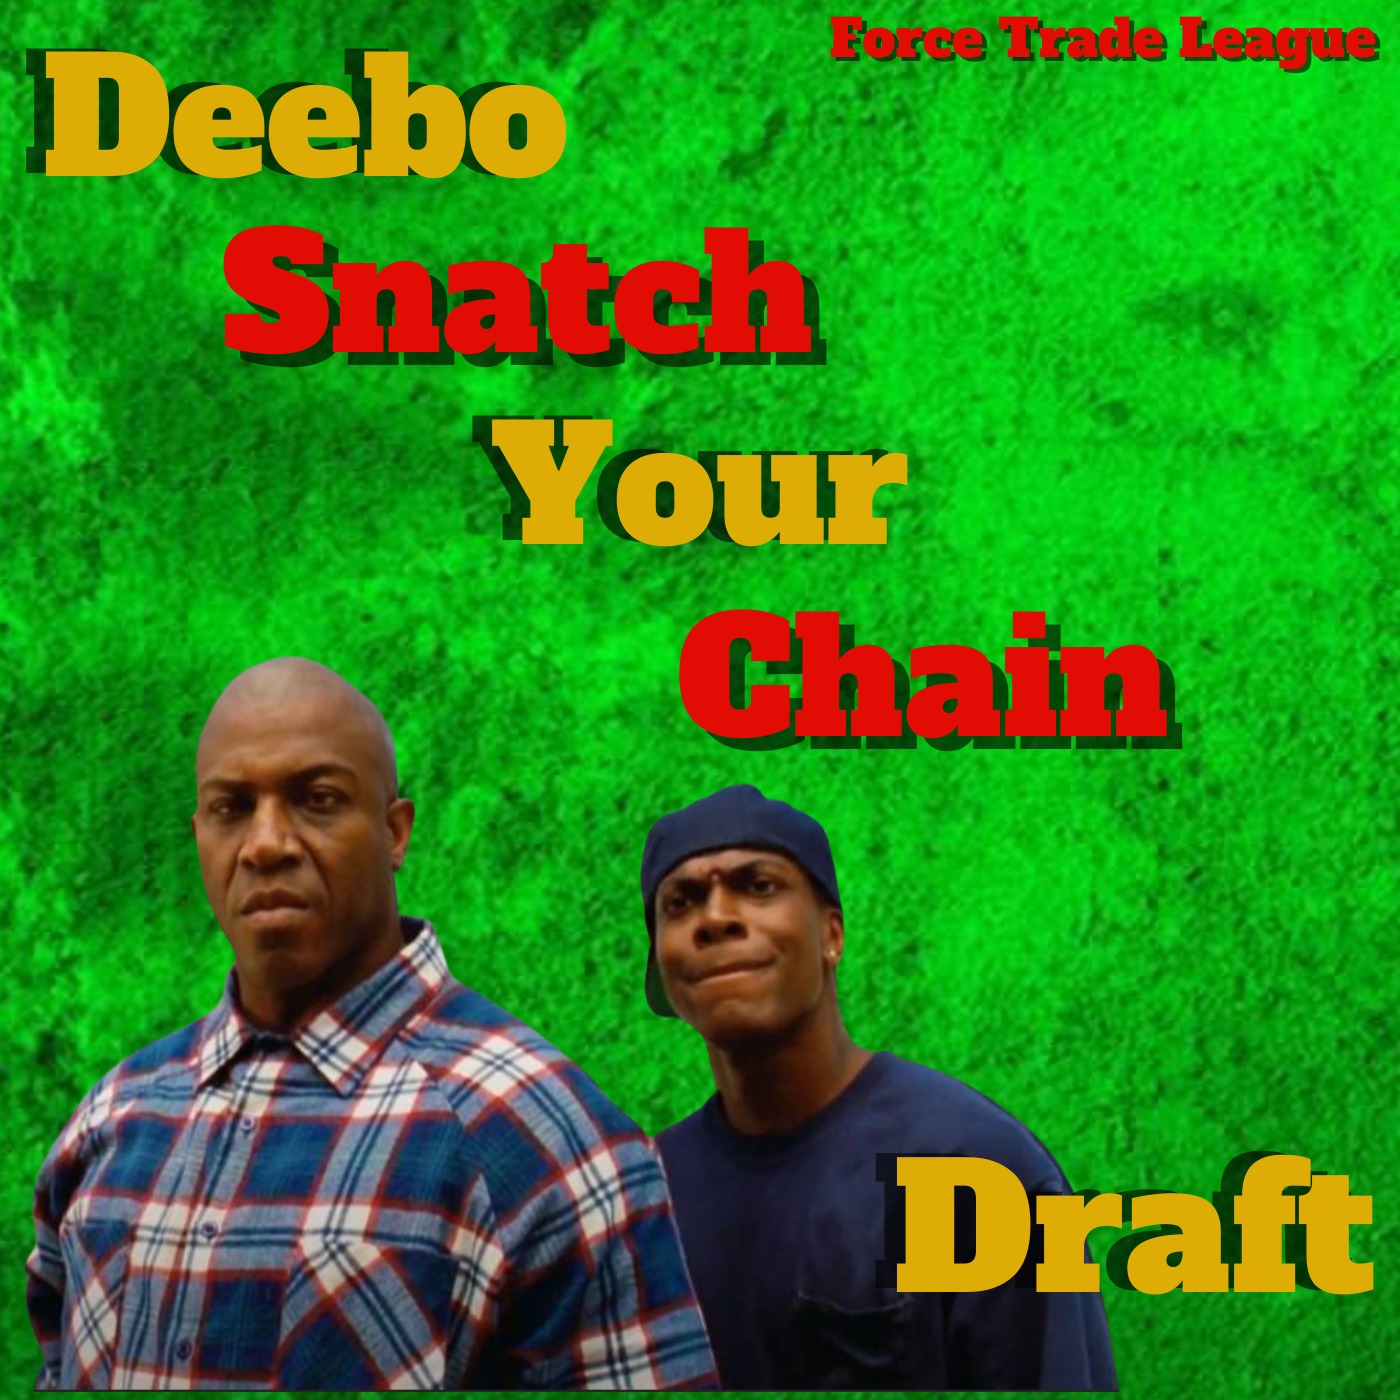 Deebo Snatch Your Chain Draft Order Race, Force Trade League